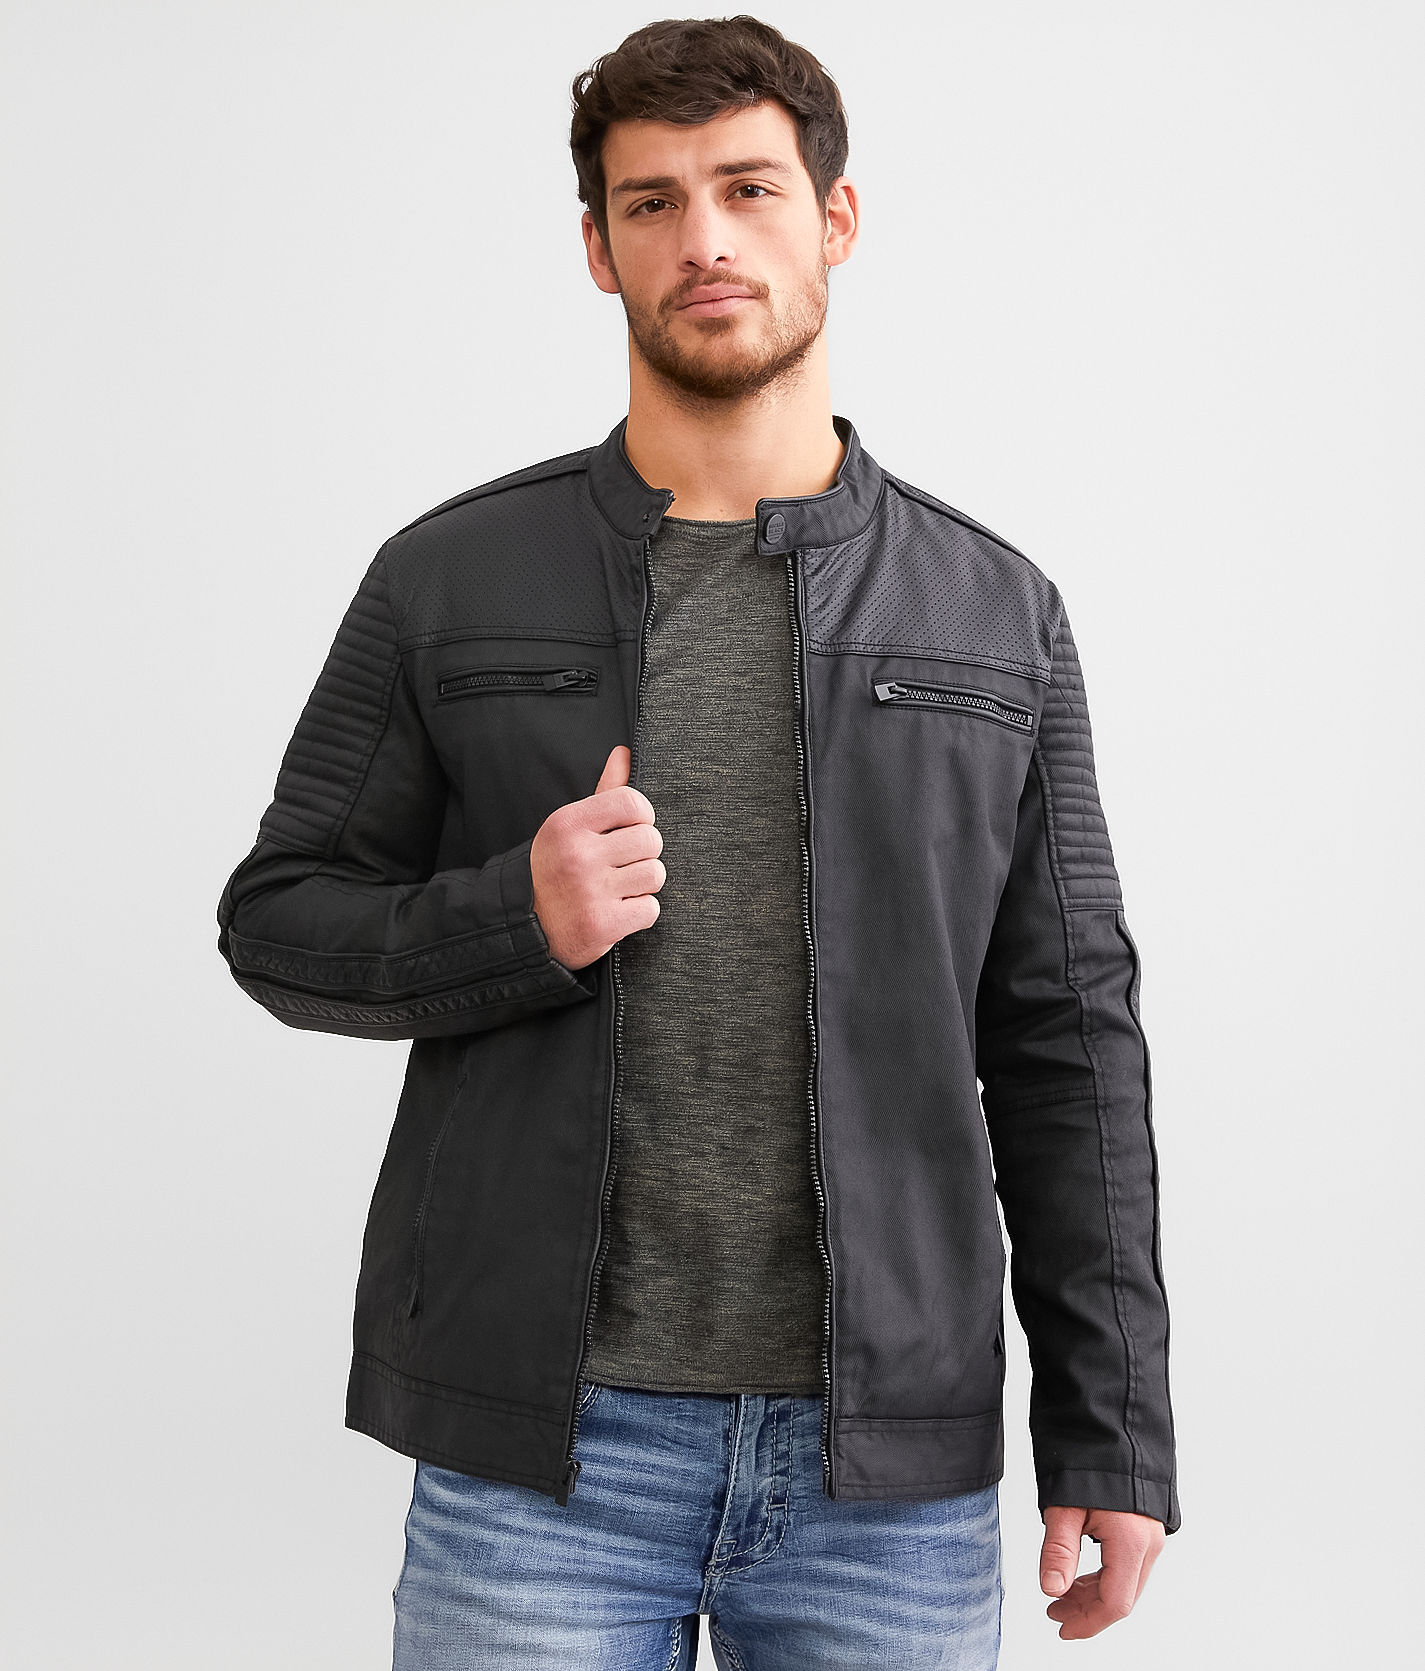 Buckle Black Perforated Faux Leather Jacket  - Black - male - Size: Medium